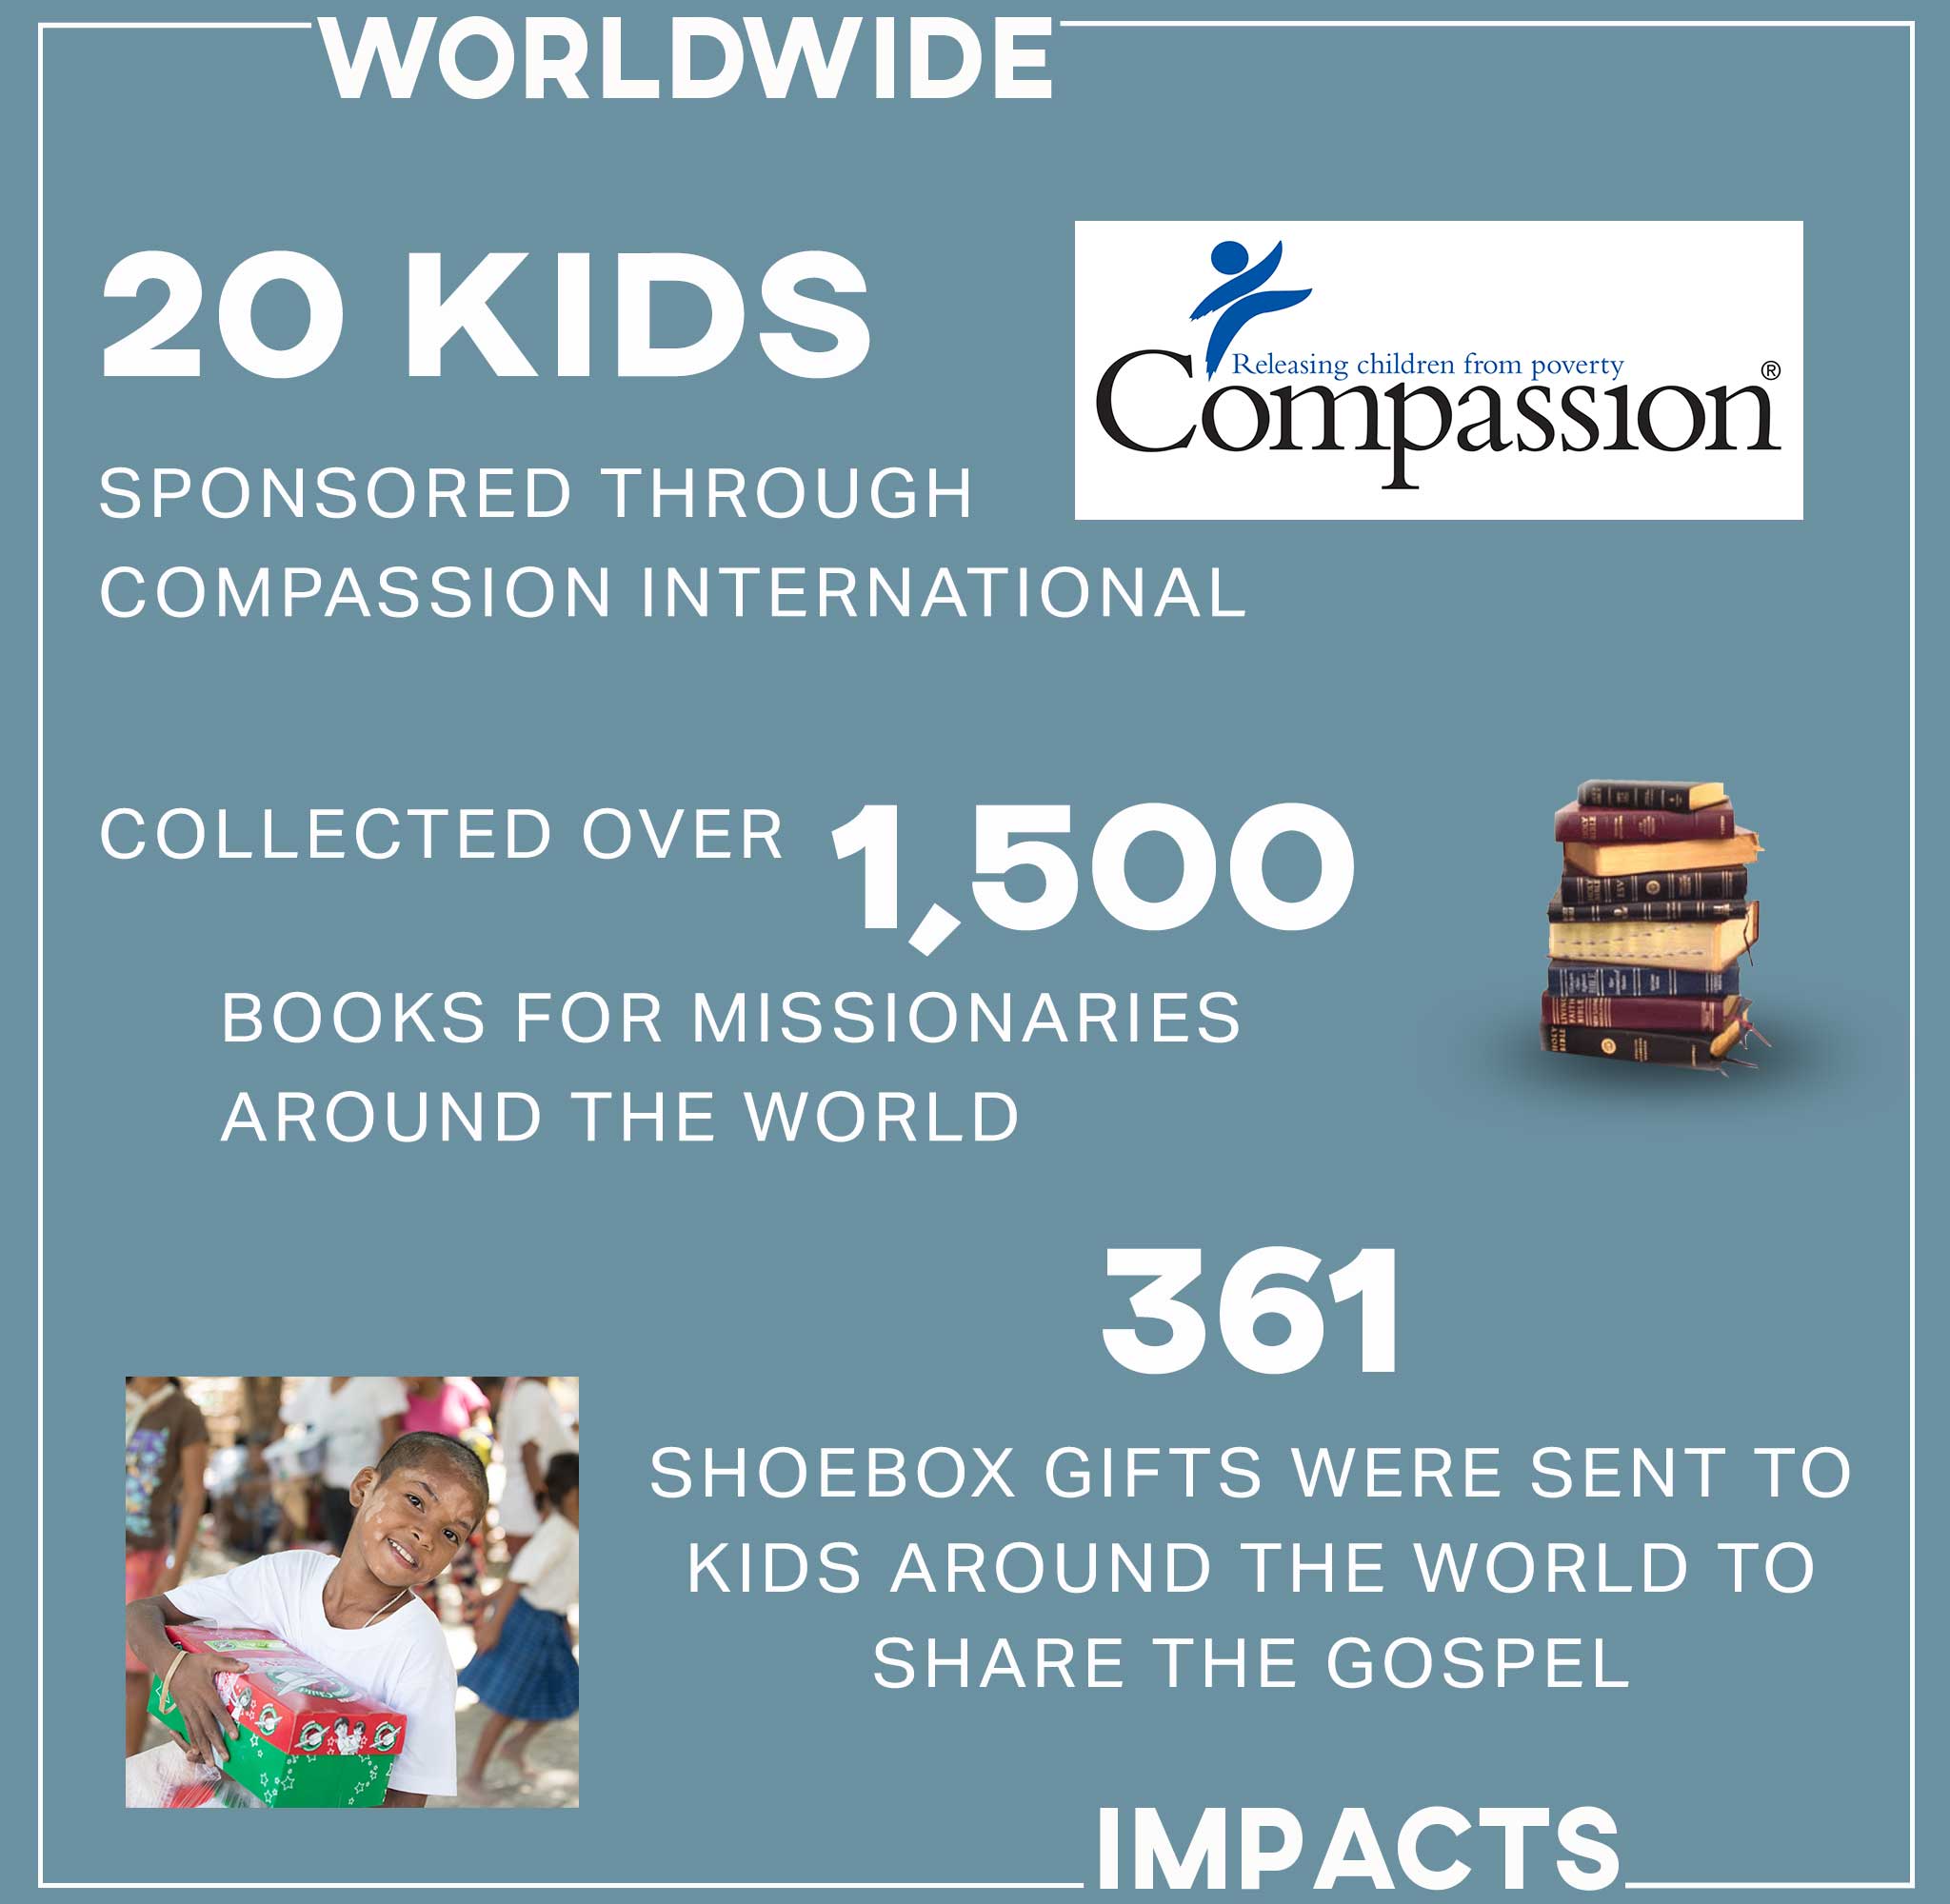 For worldwide impacts, we sponsored 20 kids through Compassion International, collected over 1,500 books for missionaries around the world, and sent 361 shoebox gifts to kids around the world.